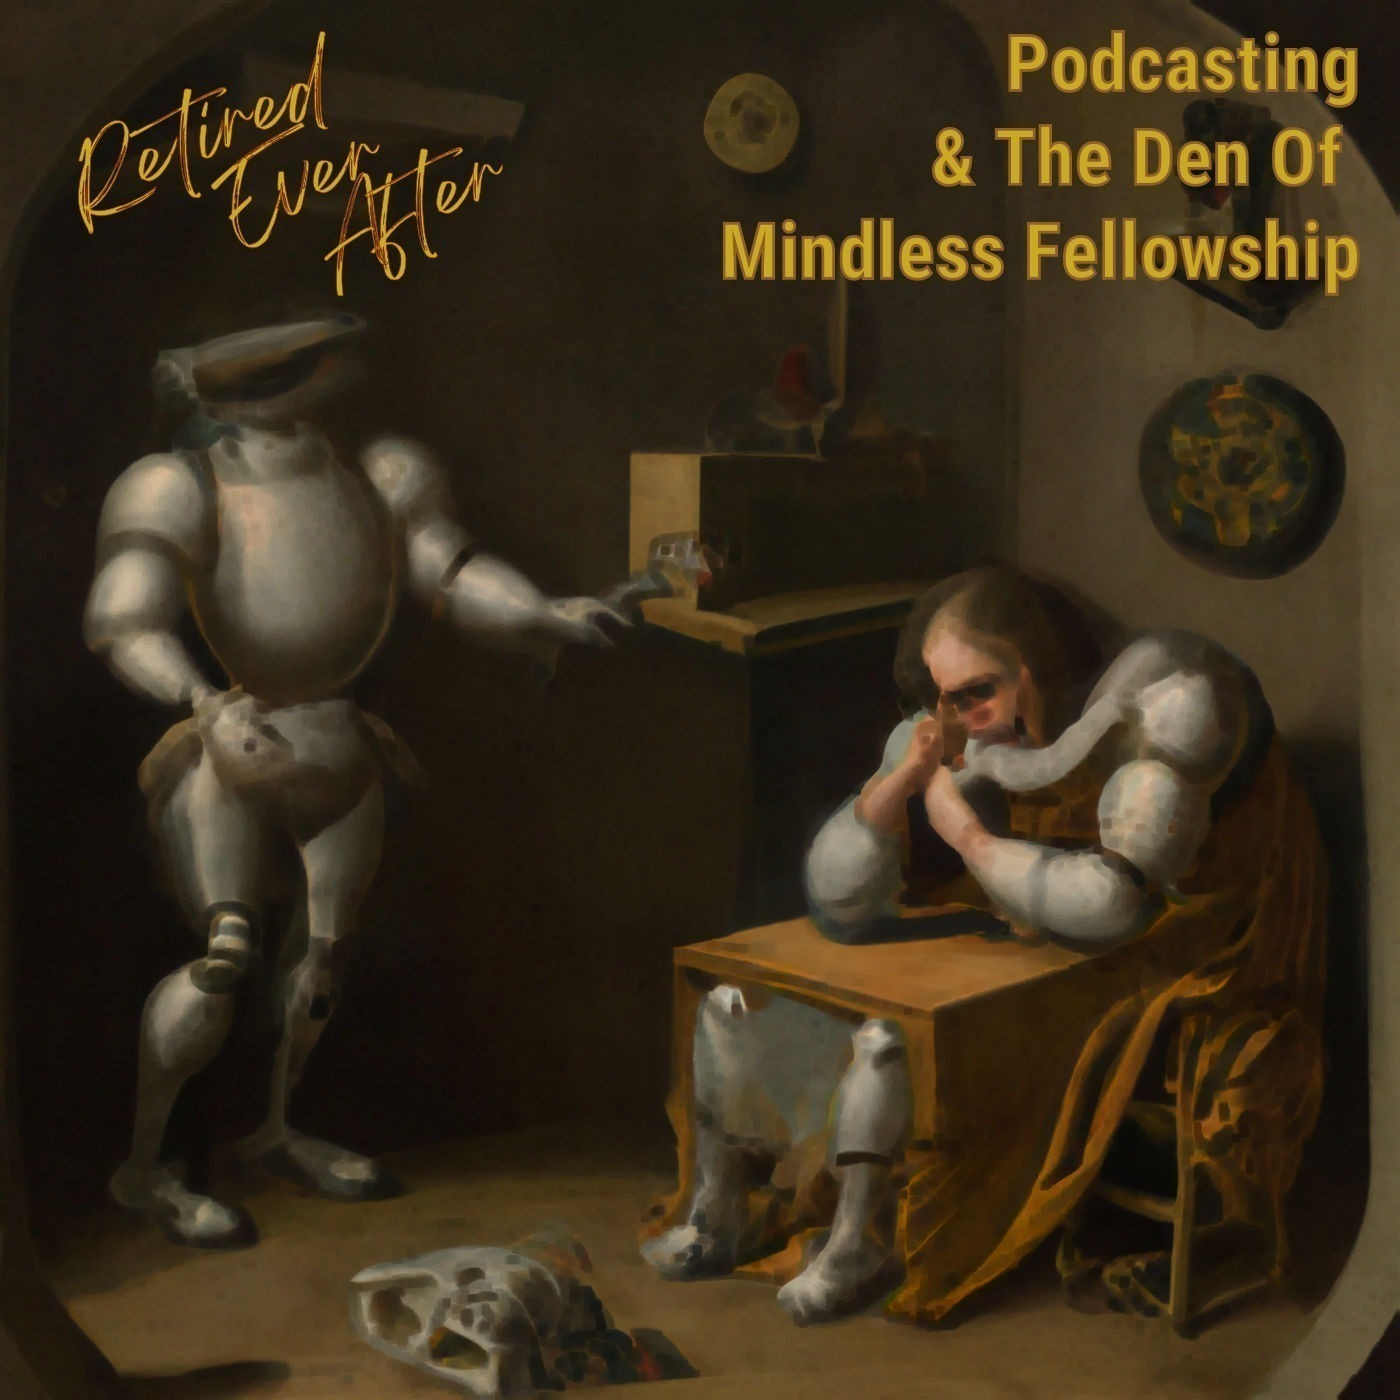 Podcasting & The Den Of Mindless Fellowship